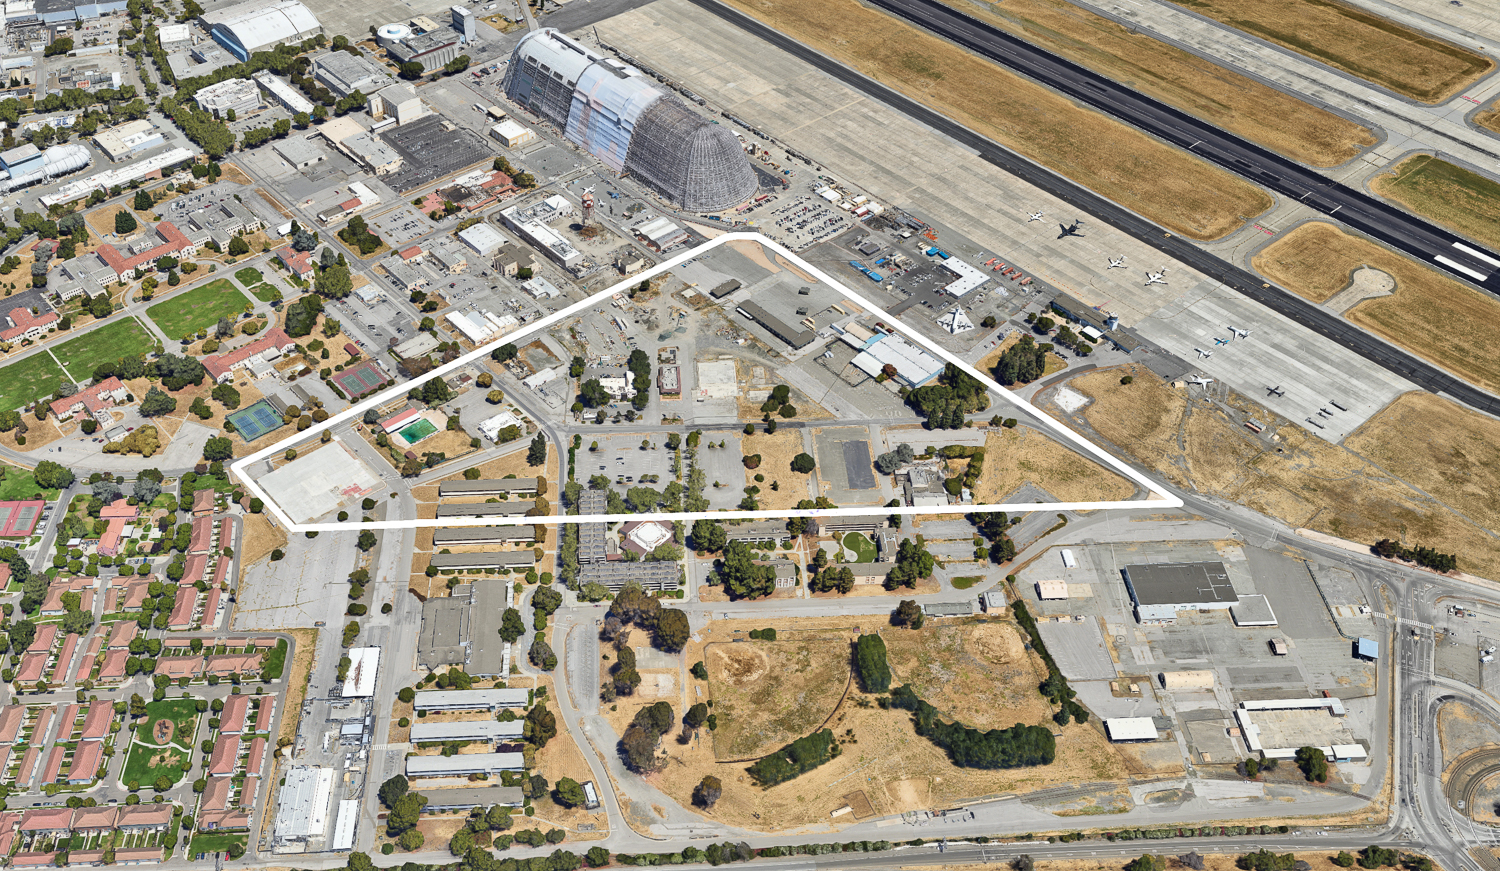 Berkeley Space Center property outlined approximately by YIMBY